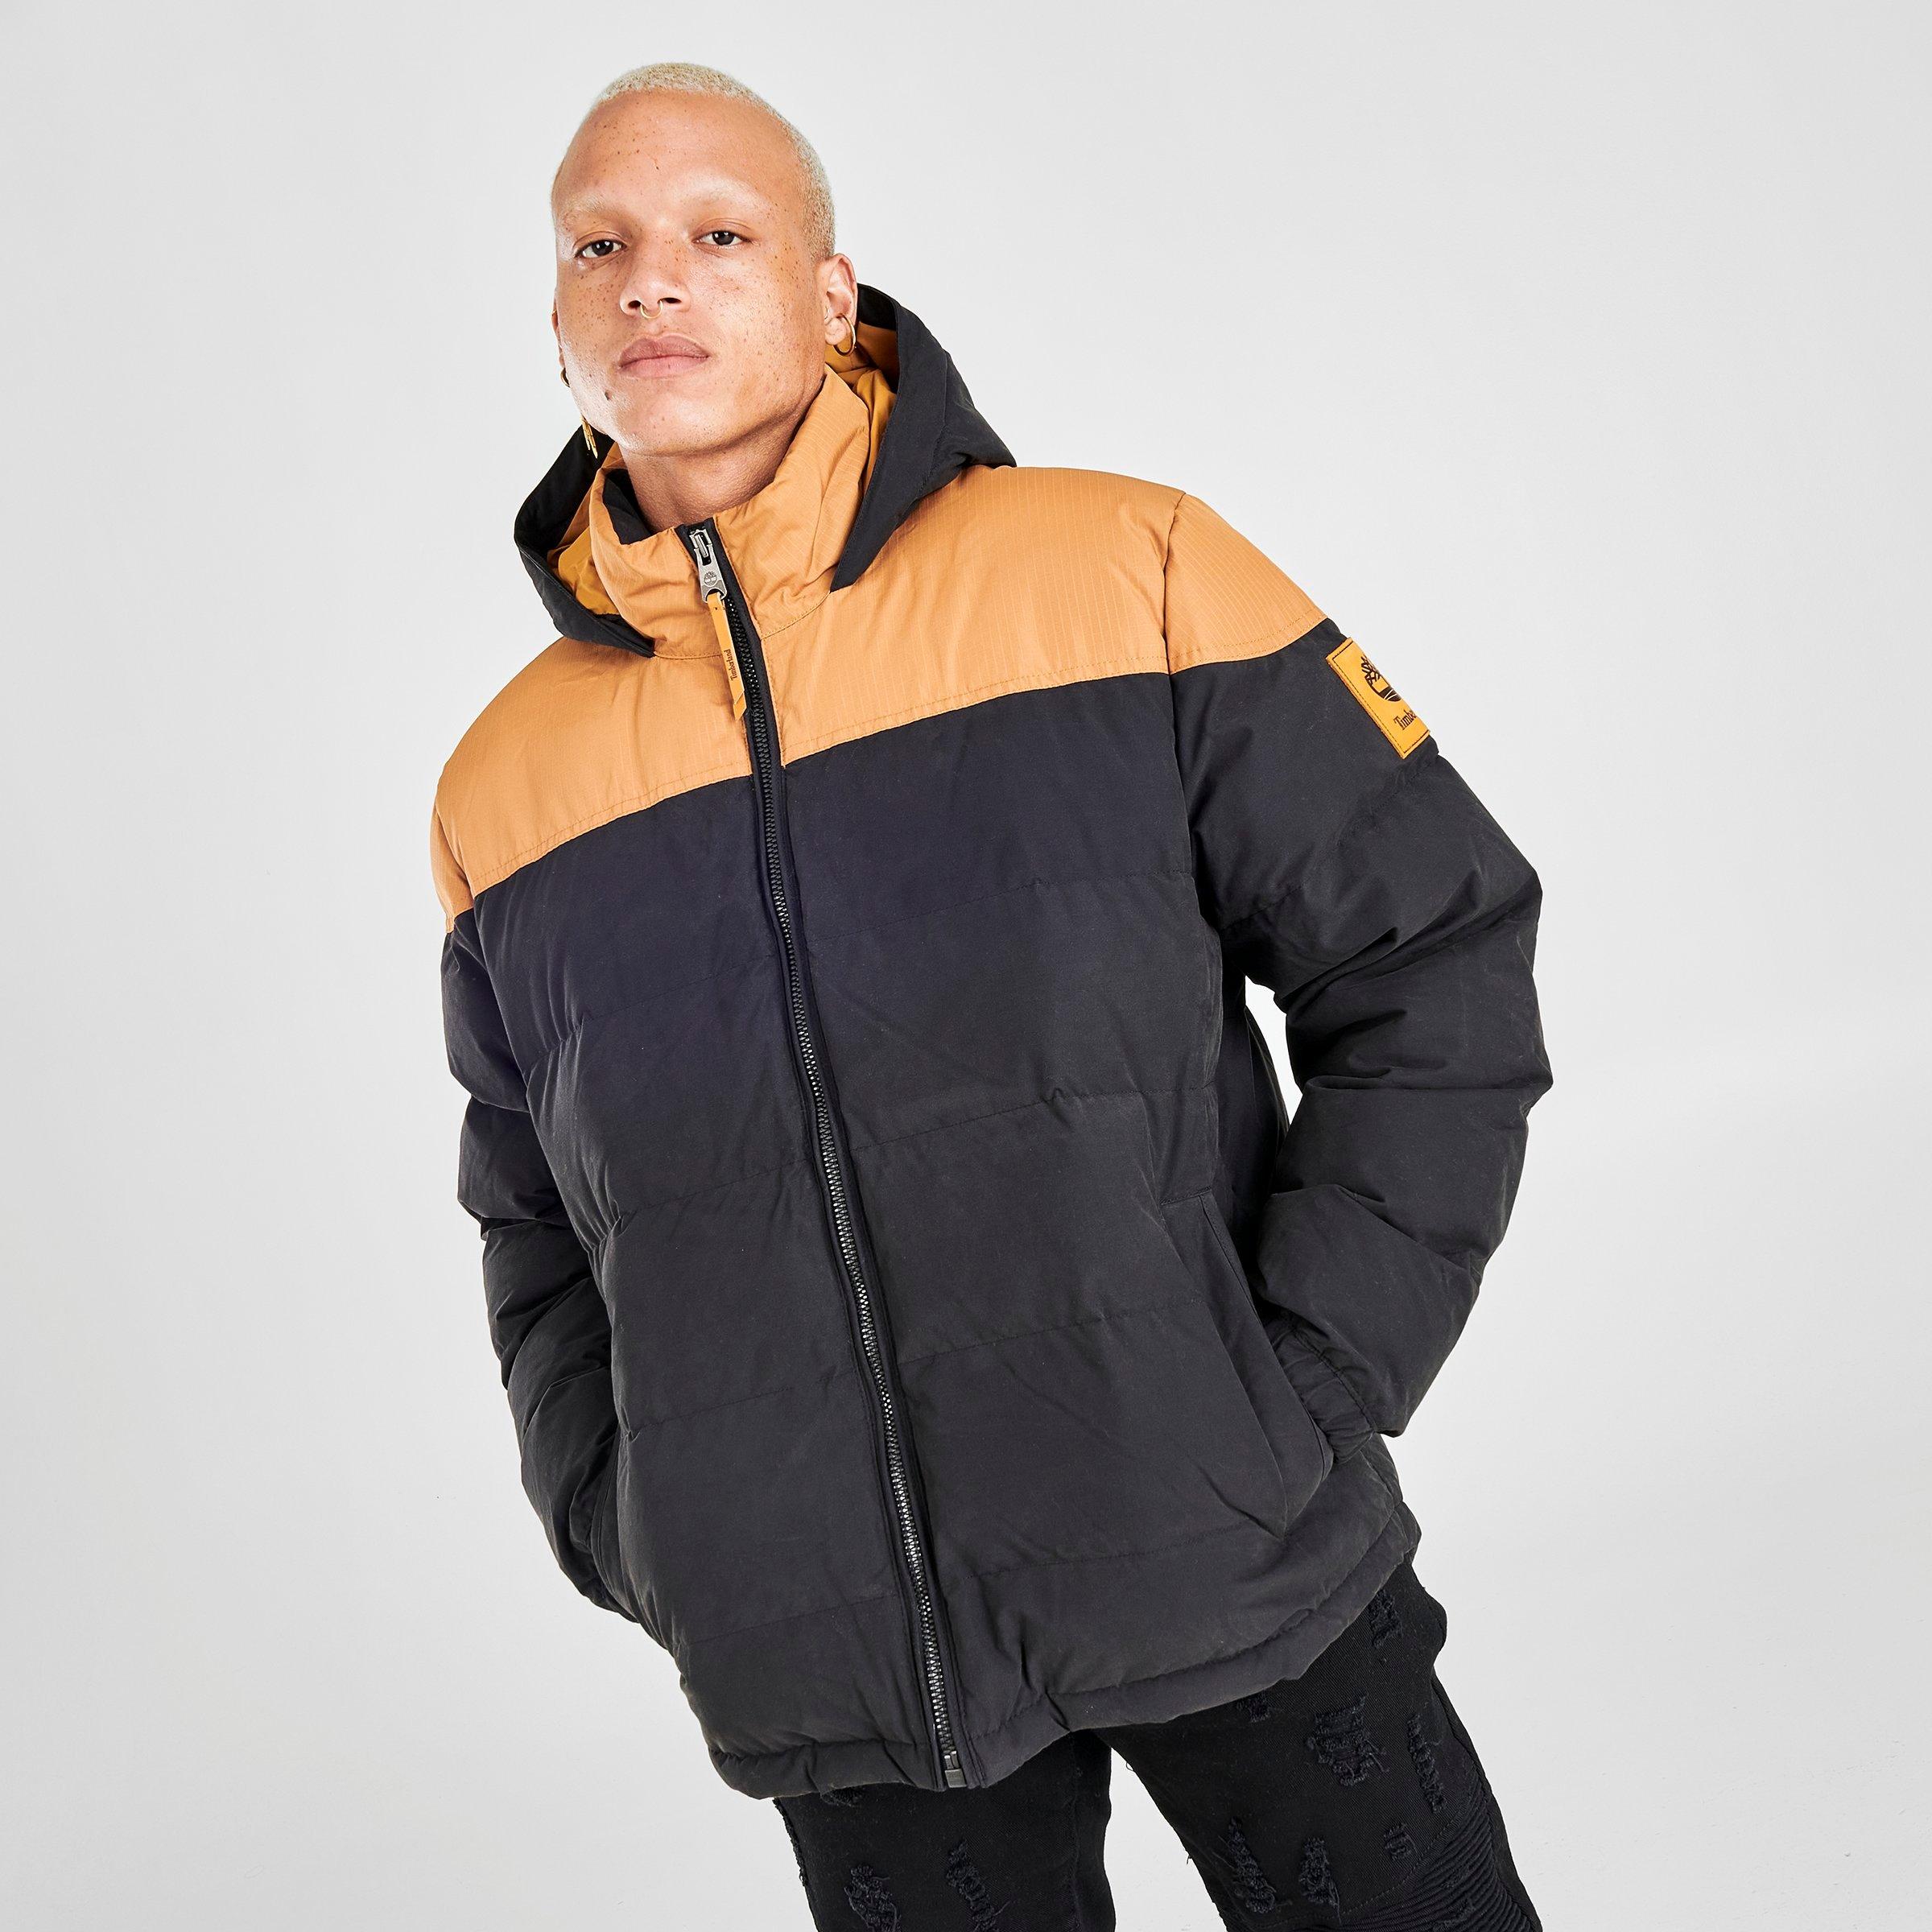 timberland 2 in 1 jacket